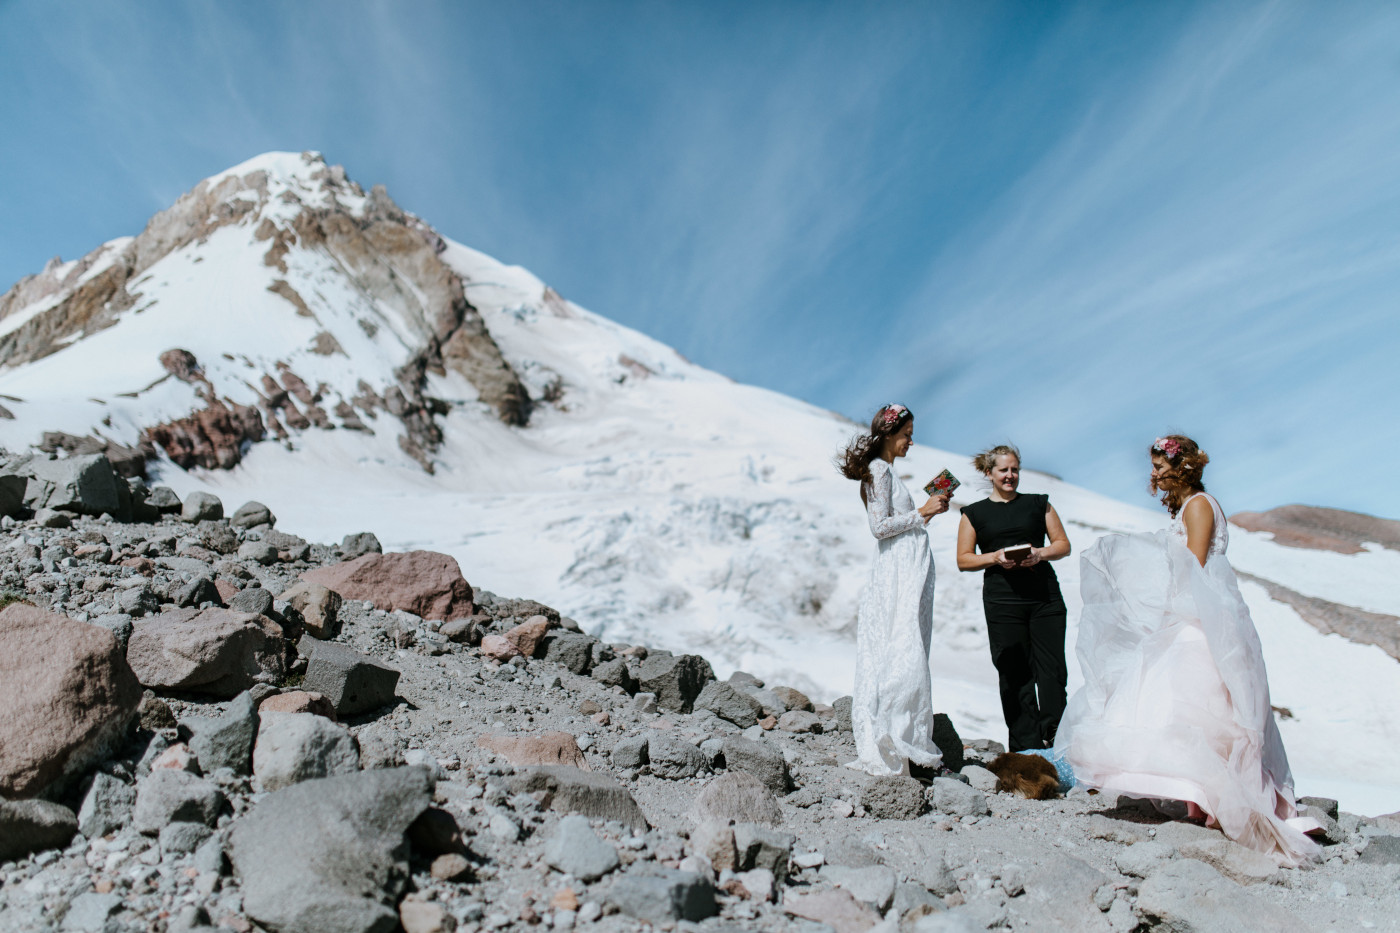 Heather and Margaux with a view of Mount Hood close behind them. Elopement photography at Mount Hood by Sienna Plus Josh.